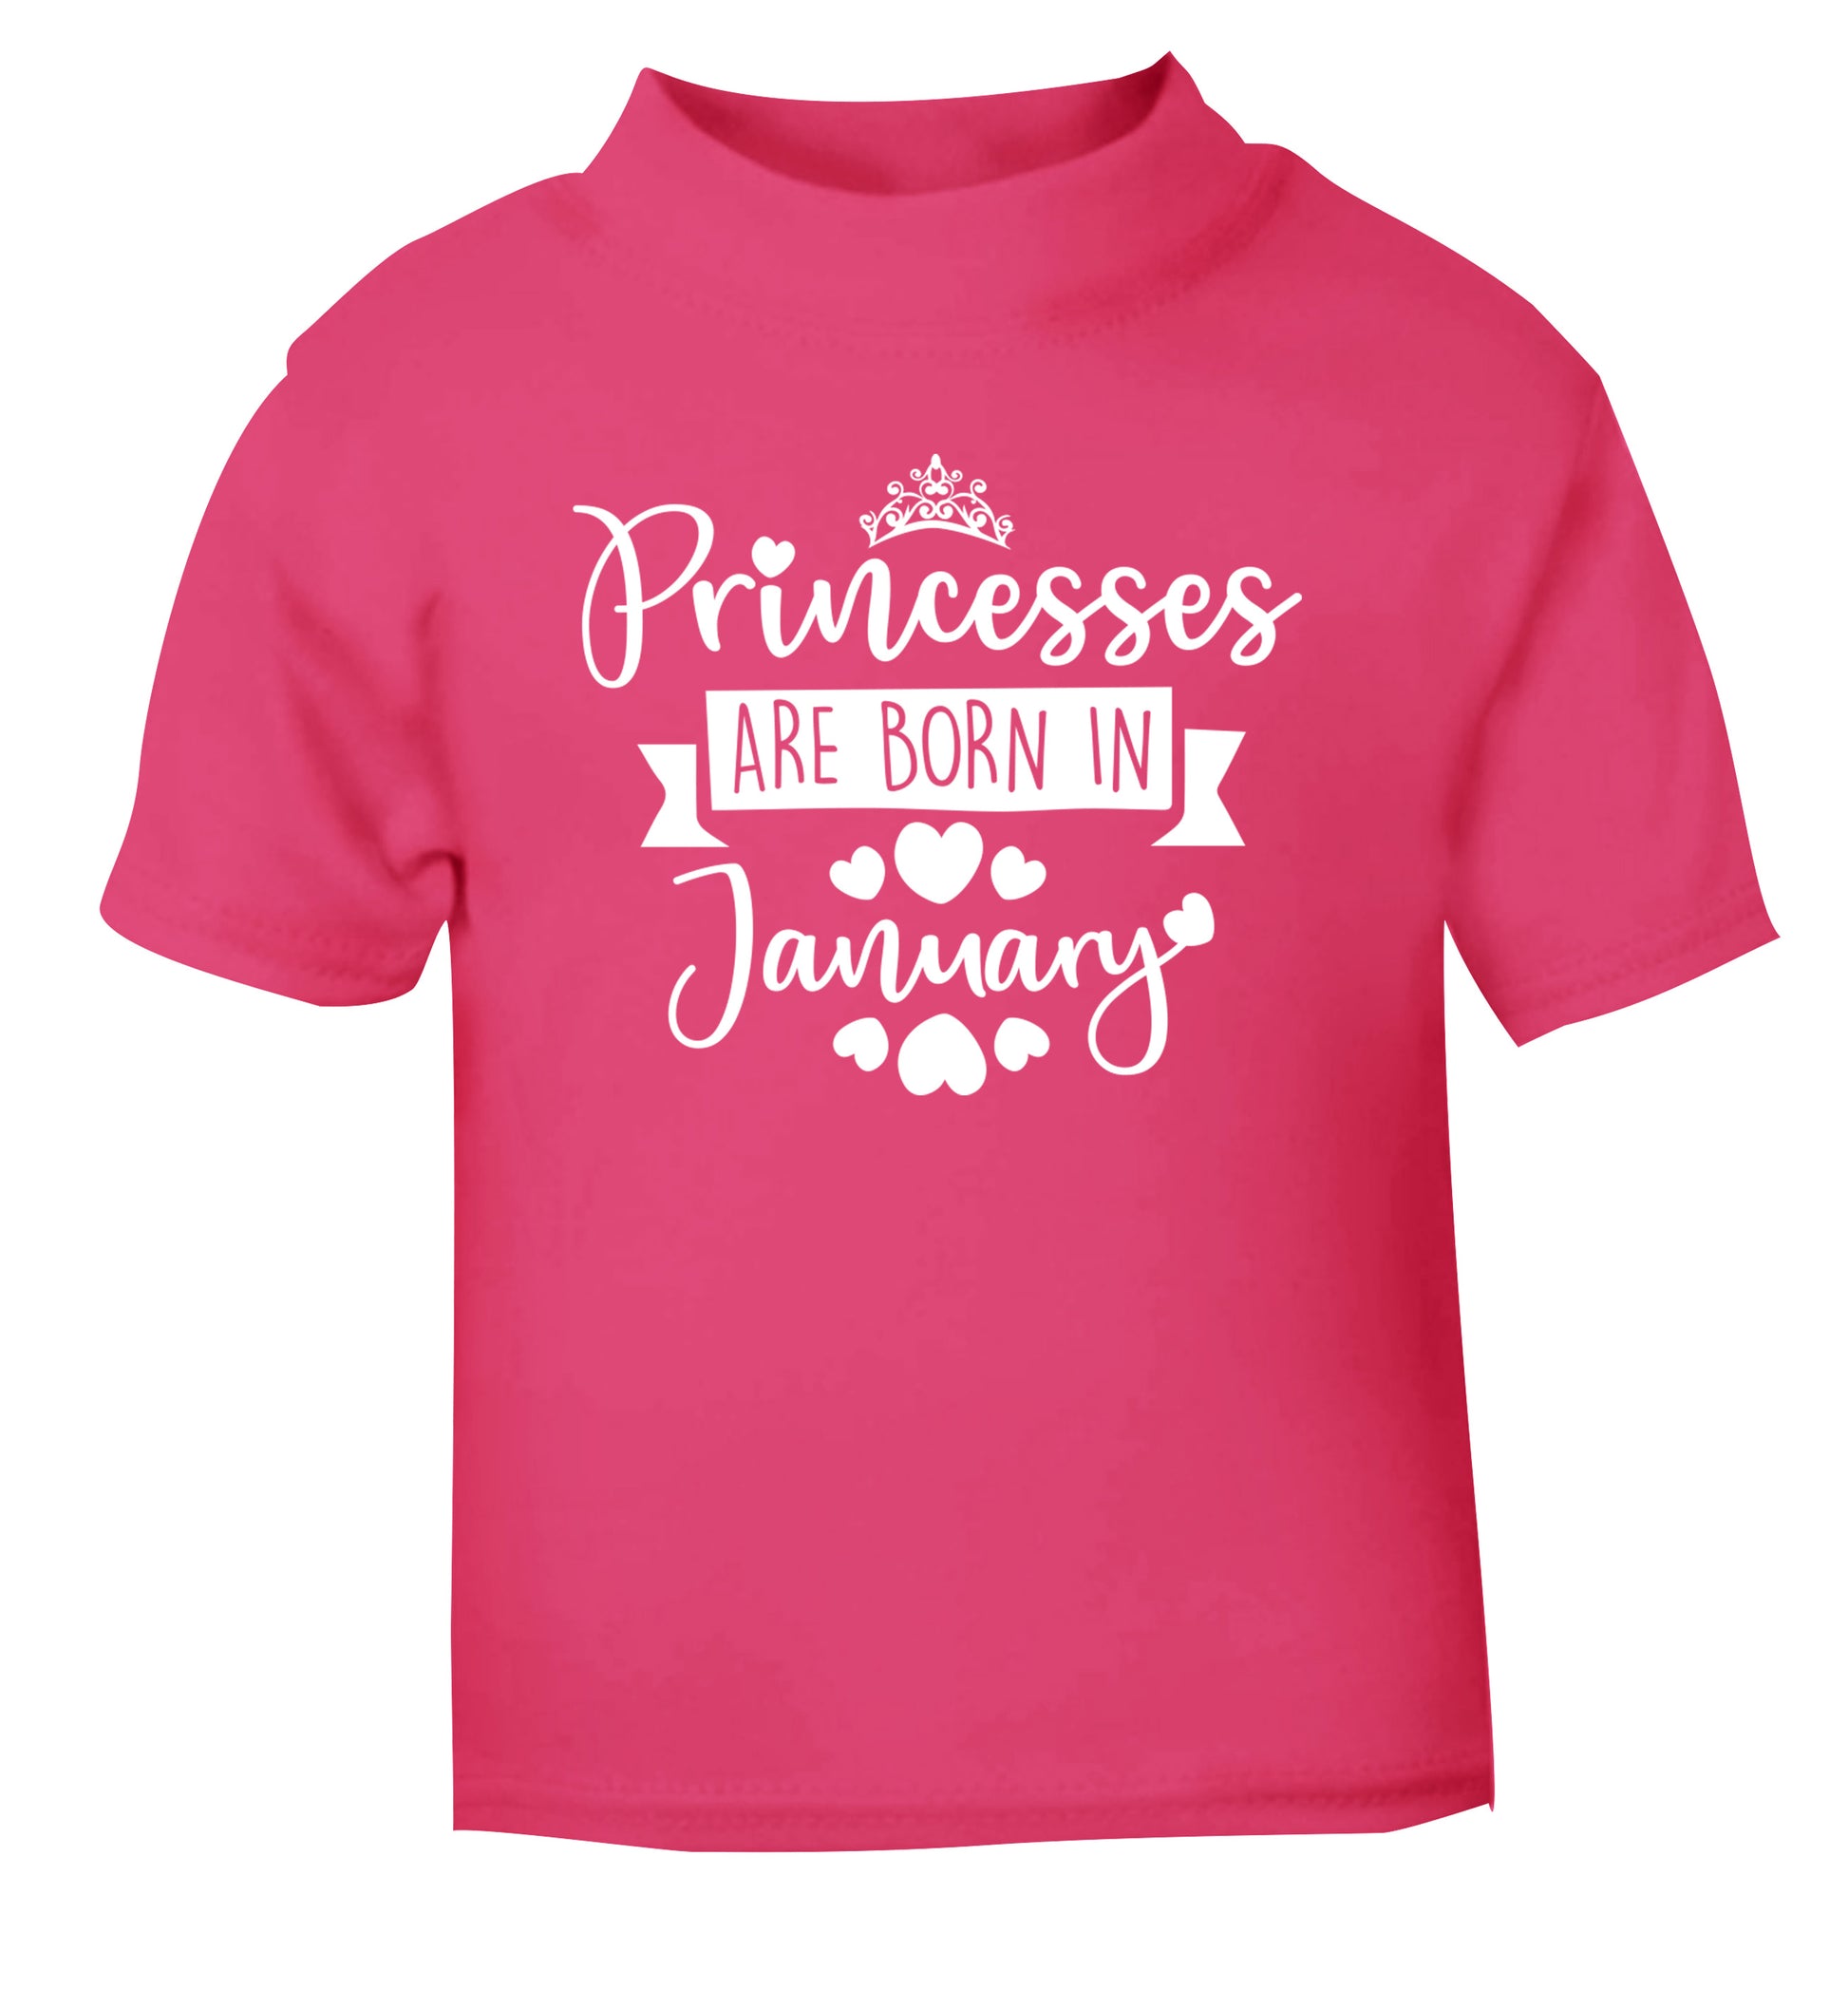 Princesses are born in January pink Baby Toddler Tshirt 2 Years